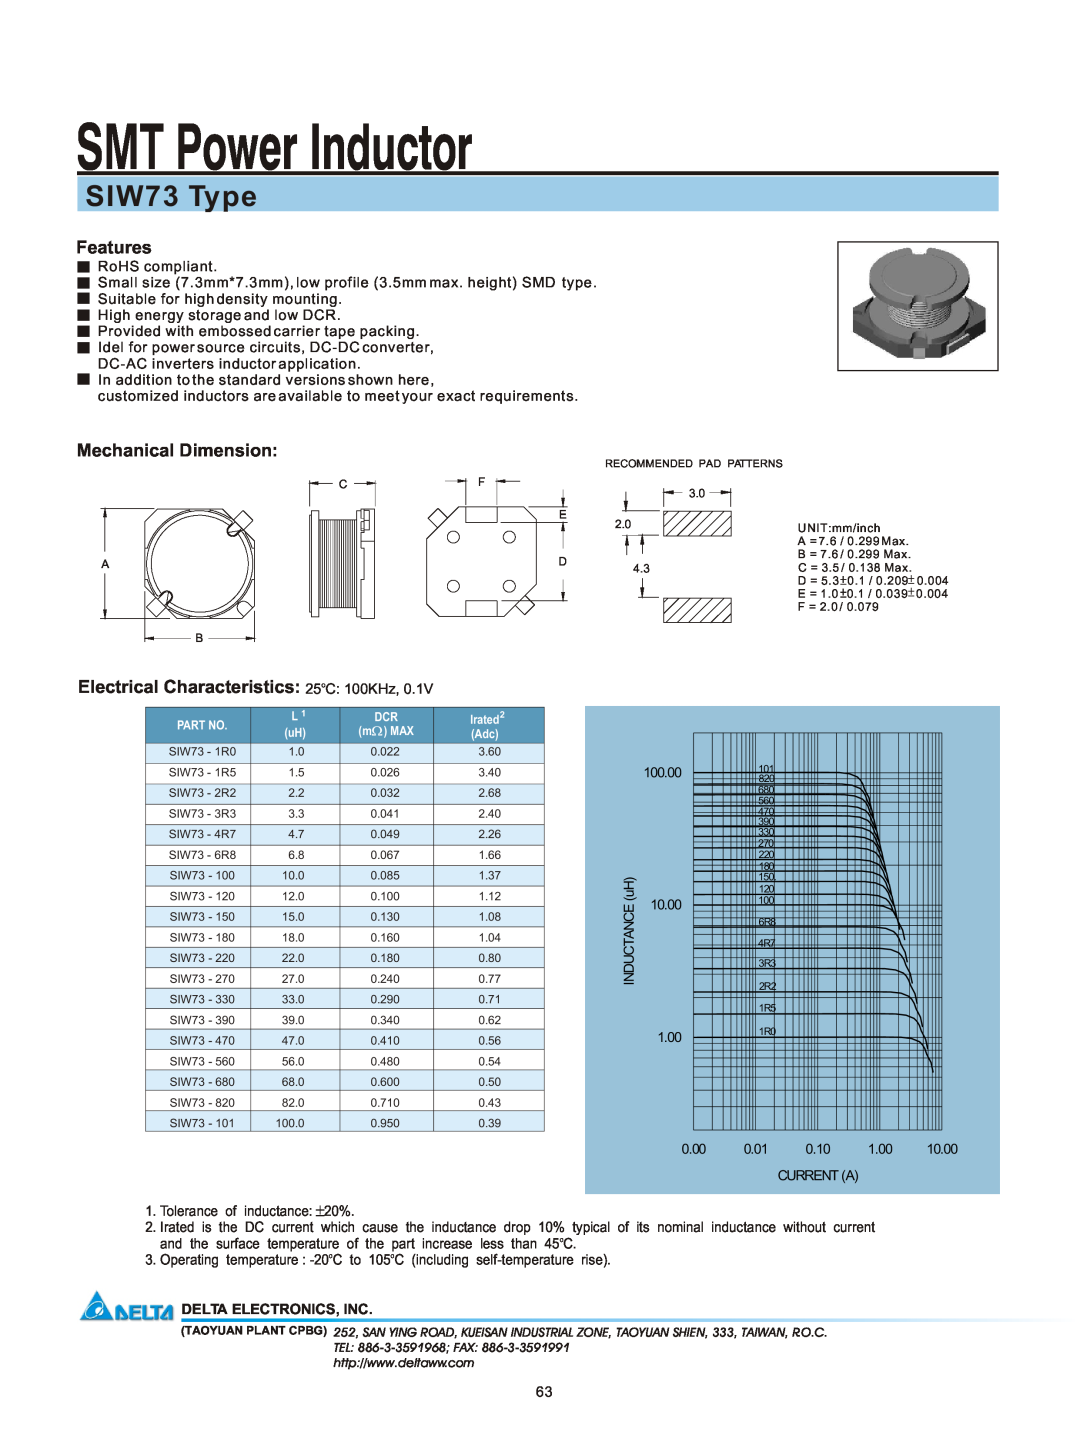 Delta Electronics manual SMT Power Inductor, SIW73 Type, Features, Mechanical Dimension, Delta Electronics, Inc 